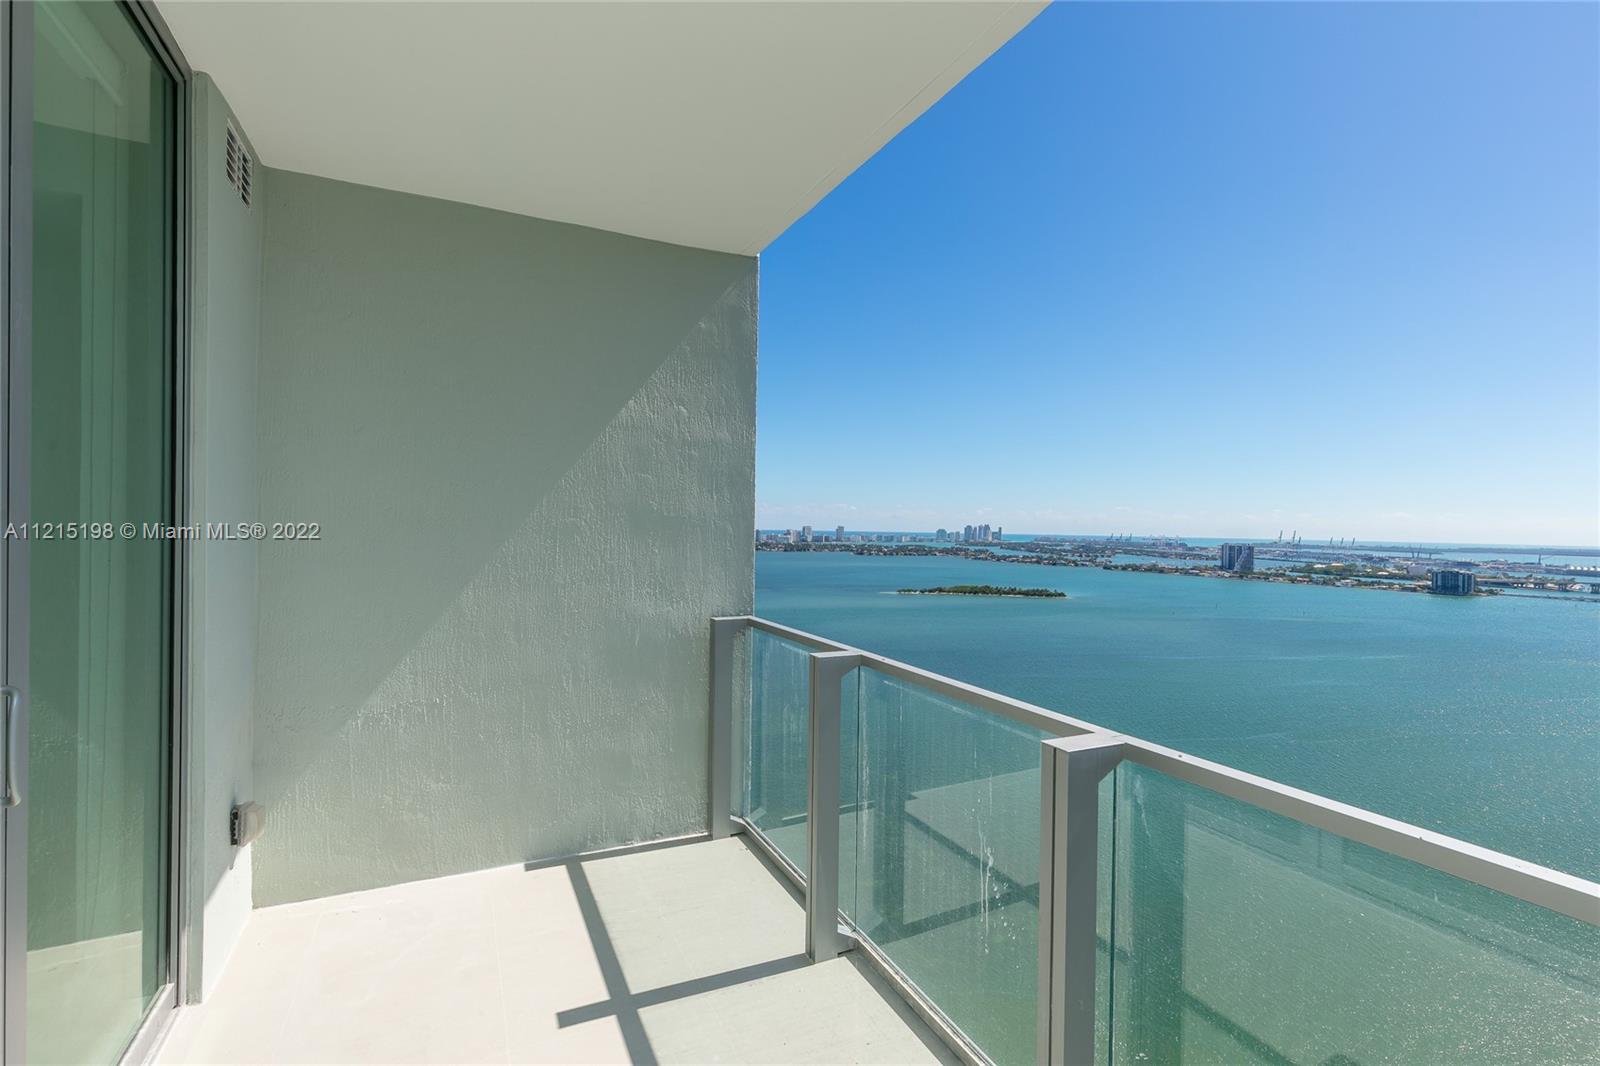 LUMINOUS AND BEAUTIFULLY FINISHED 1 BED/2 BATHS, PLUS DEN AREA LOCATED IN DESIRED EAST EDGEWATER.  UNFURNISHED. GREAT WATER AND CITY VIEWS FROM THE 31ST FLOOR. OPENED KITCHEN WITH MIELE APPLIANCES, RECTIFIED PORCELAIN THROUGH THE UNIT AND CUSTOM-MADE CLOSET.  FLOOR-TO-CEILING IMPACT WINDOWS, PRIVATE FOYER. 1 ASSIGNED COVERED PARKING SPACE (#865).  PRESTIGIOUS BISCAYNE BEACH CONDO OFFERS HIGH-CLASS AMENITIES: BEACH CLUB, TWO POOLS WITH SPA AND CABANAS, TENNIS COURTS/BASKETBALL, BEACH VOLLEY, SAUNA, AND STATE-OF-THE-ART FITNESS CENTER OVERLOOKING THE BAY. CLOSE TO WYNWOOD, DESIGN DISTRICT, MIDTOWN, AND EASY ACCESS TO I-95 FOR AIRPORT, BRICKELL, AND THE BEACHES. RENTED AT $3,075/MONTH UNTIL 10/31/22.  SHOWINGS STRICTLY WTIH 24 HOURS NOTICE PLEASE.  ONLY ACCEPTING CASH OFFERS W/PROOF OF FUNDS.